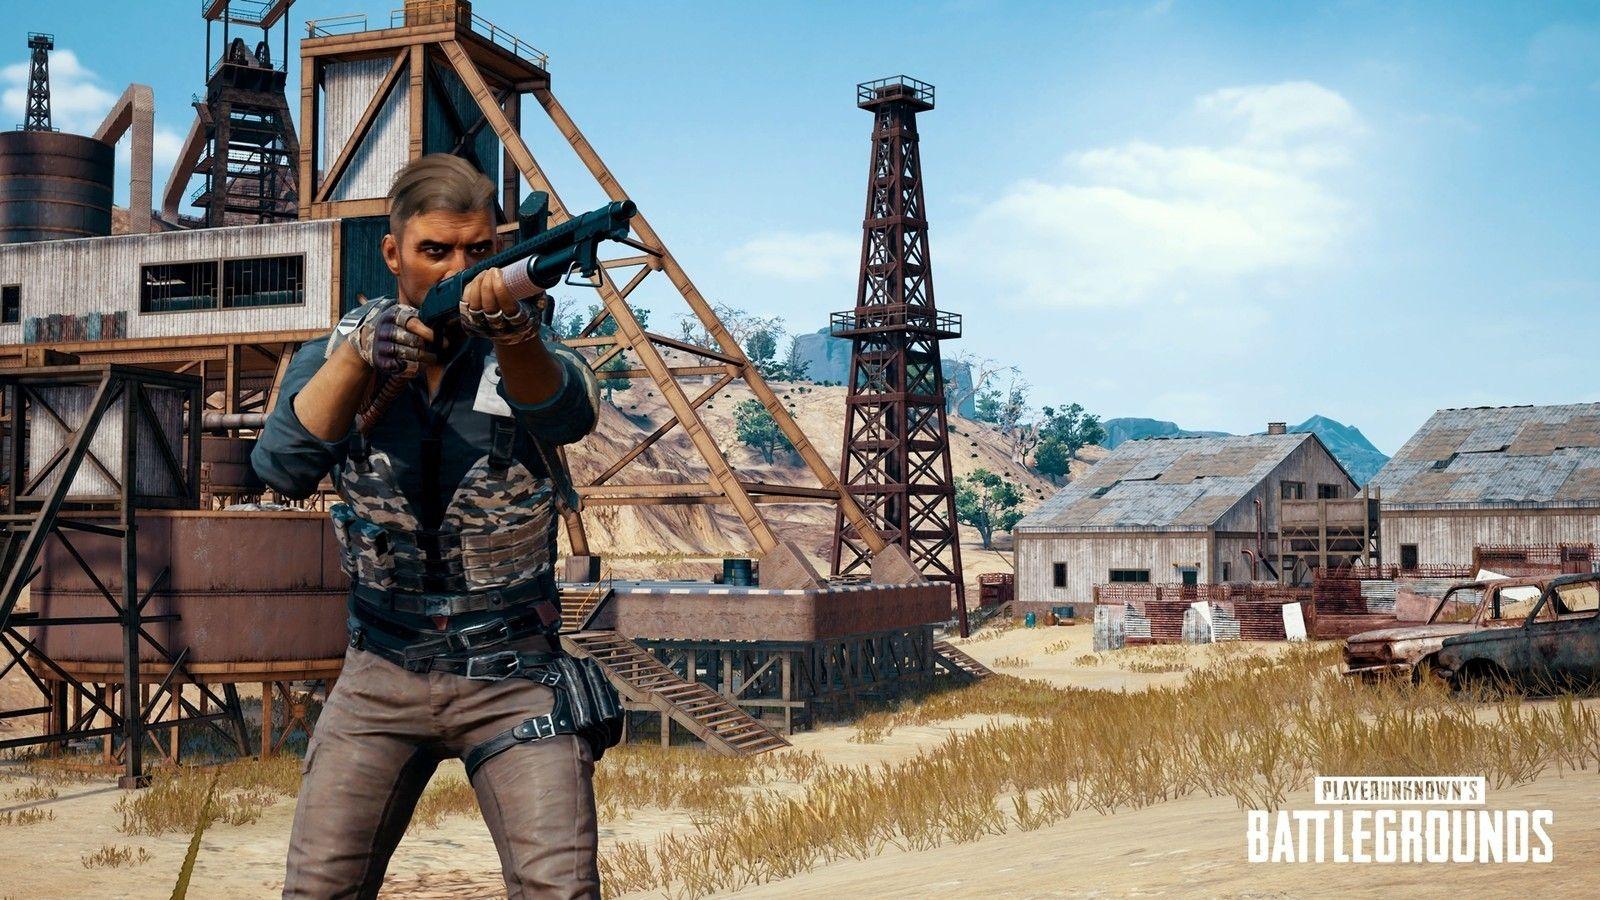 PlayerUnknown's Battlegrounds (PUBG) PC update makes changes to